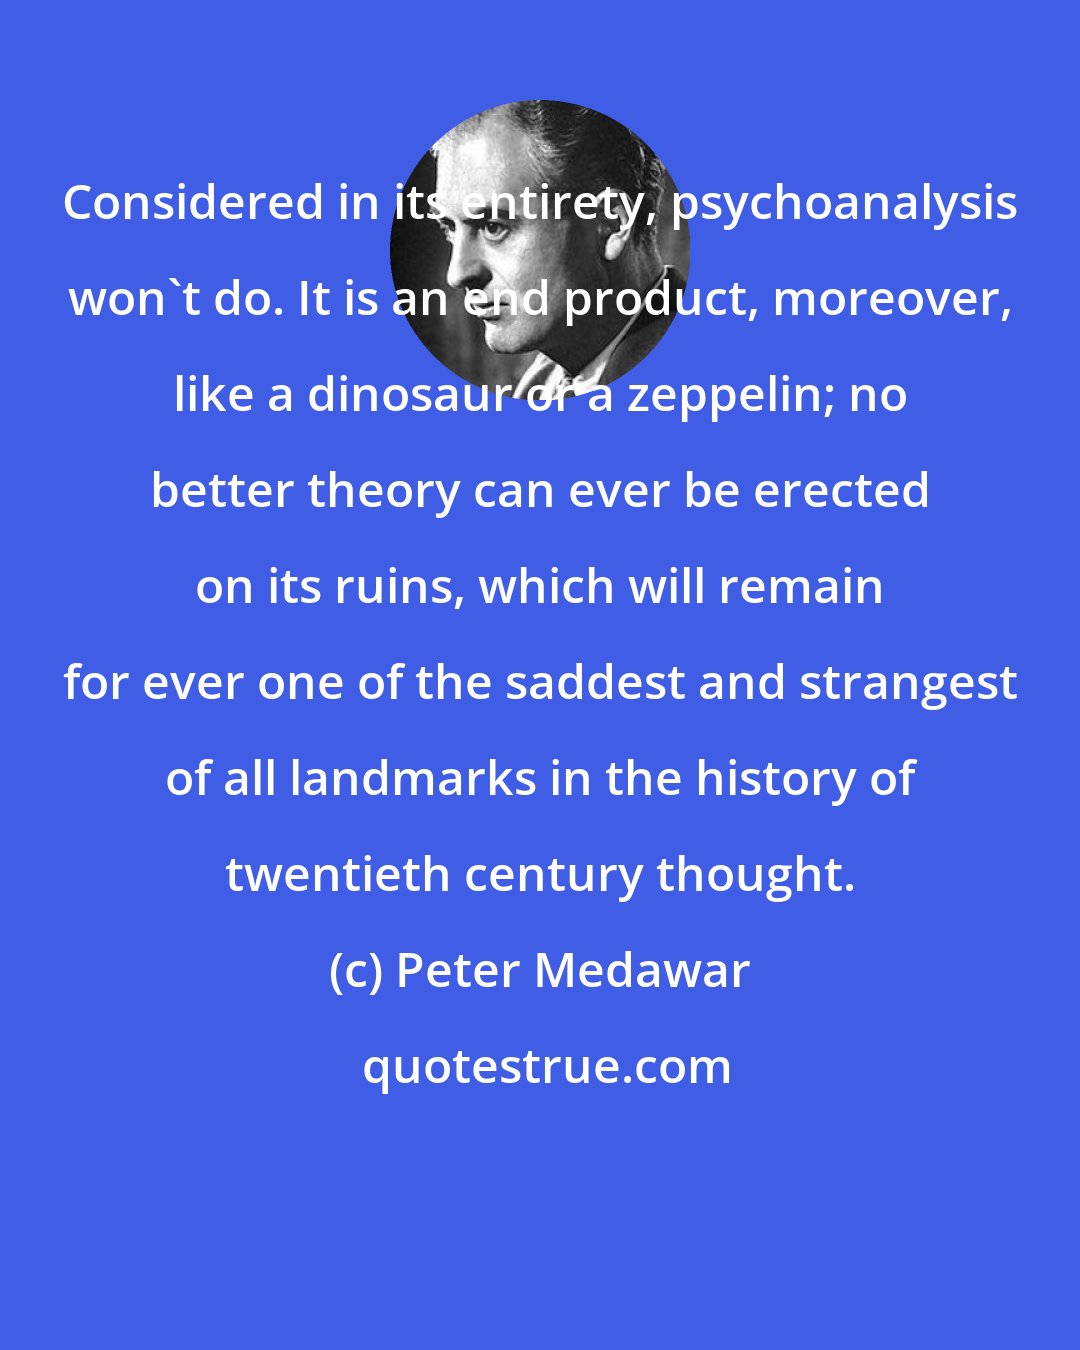 Peter Medawar: Considered in its entirety, psychoanalysis won't do. It is an end product, moreover, like a dinosaur or a zeppelin; no better theory can ever be erected on its ruins, which will remain for ever one of the saddest and strangest of all landmarks in the history of twentieth century thought.